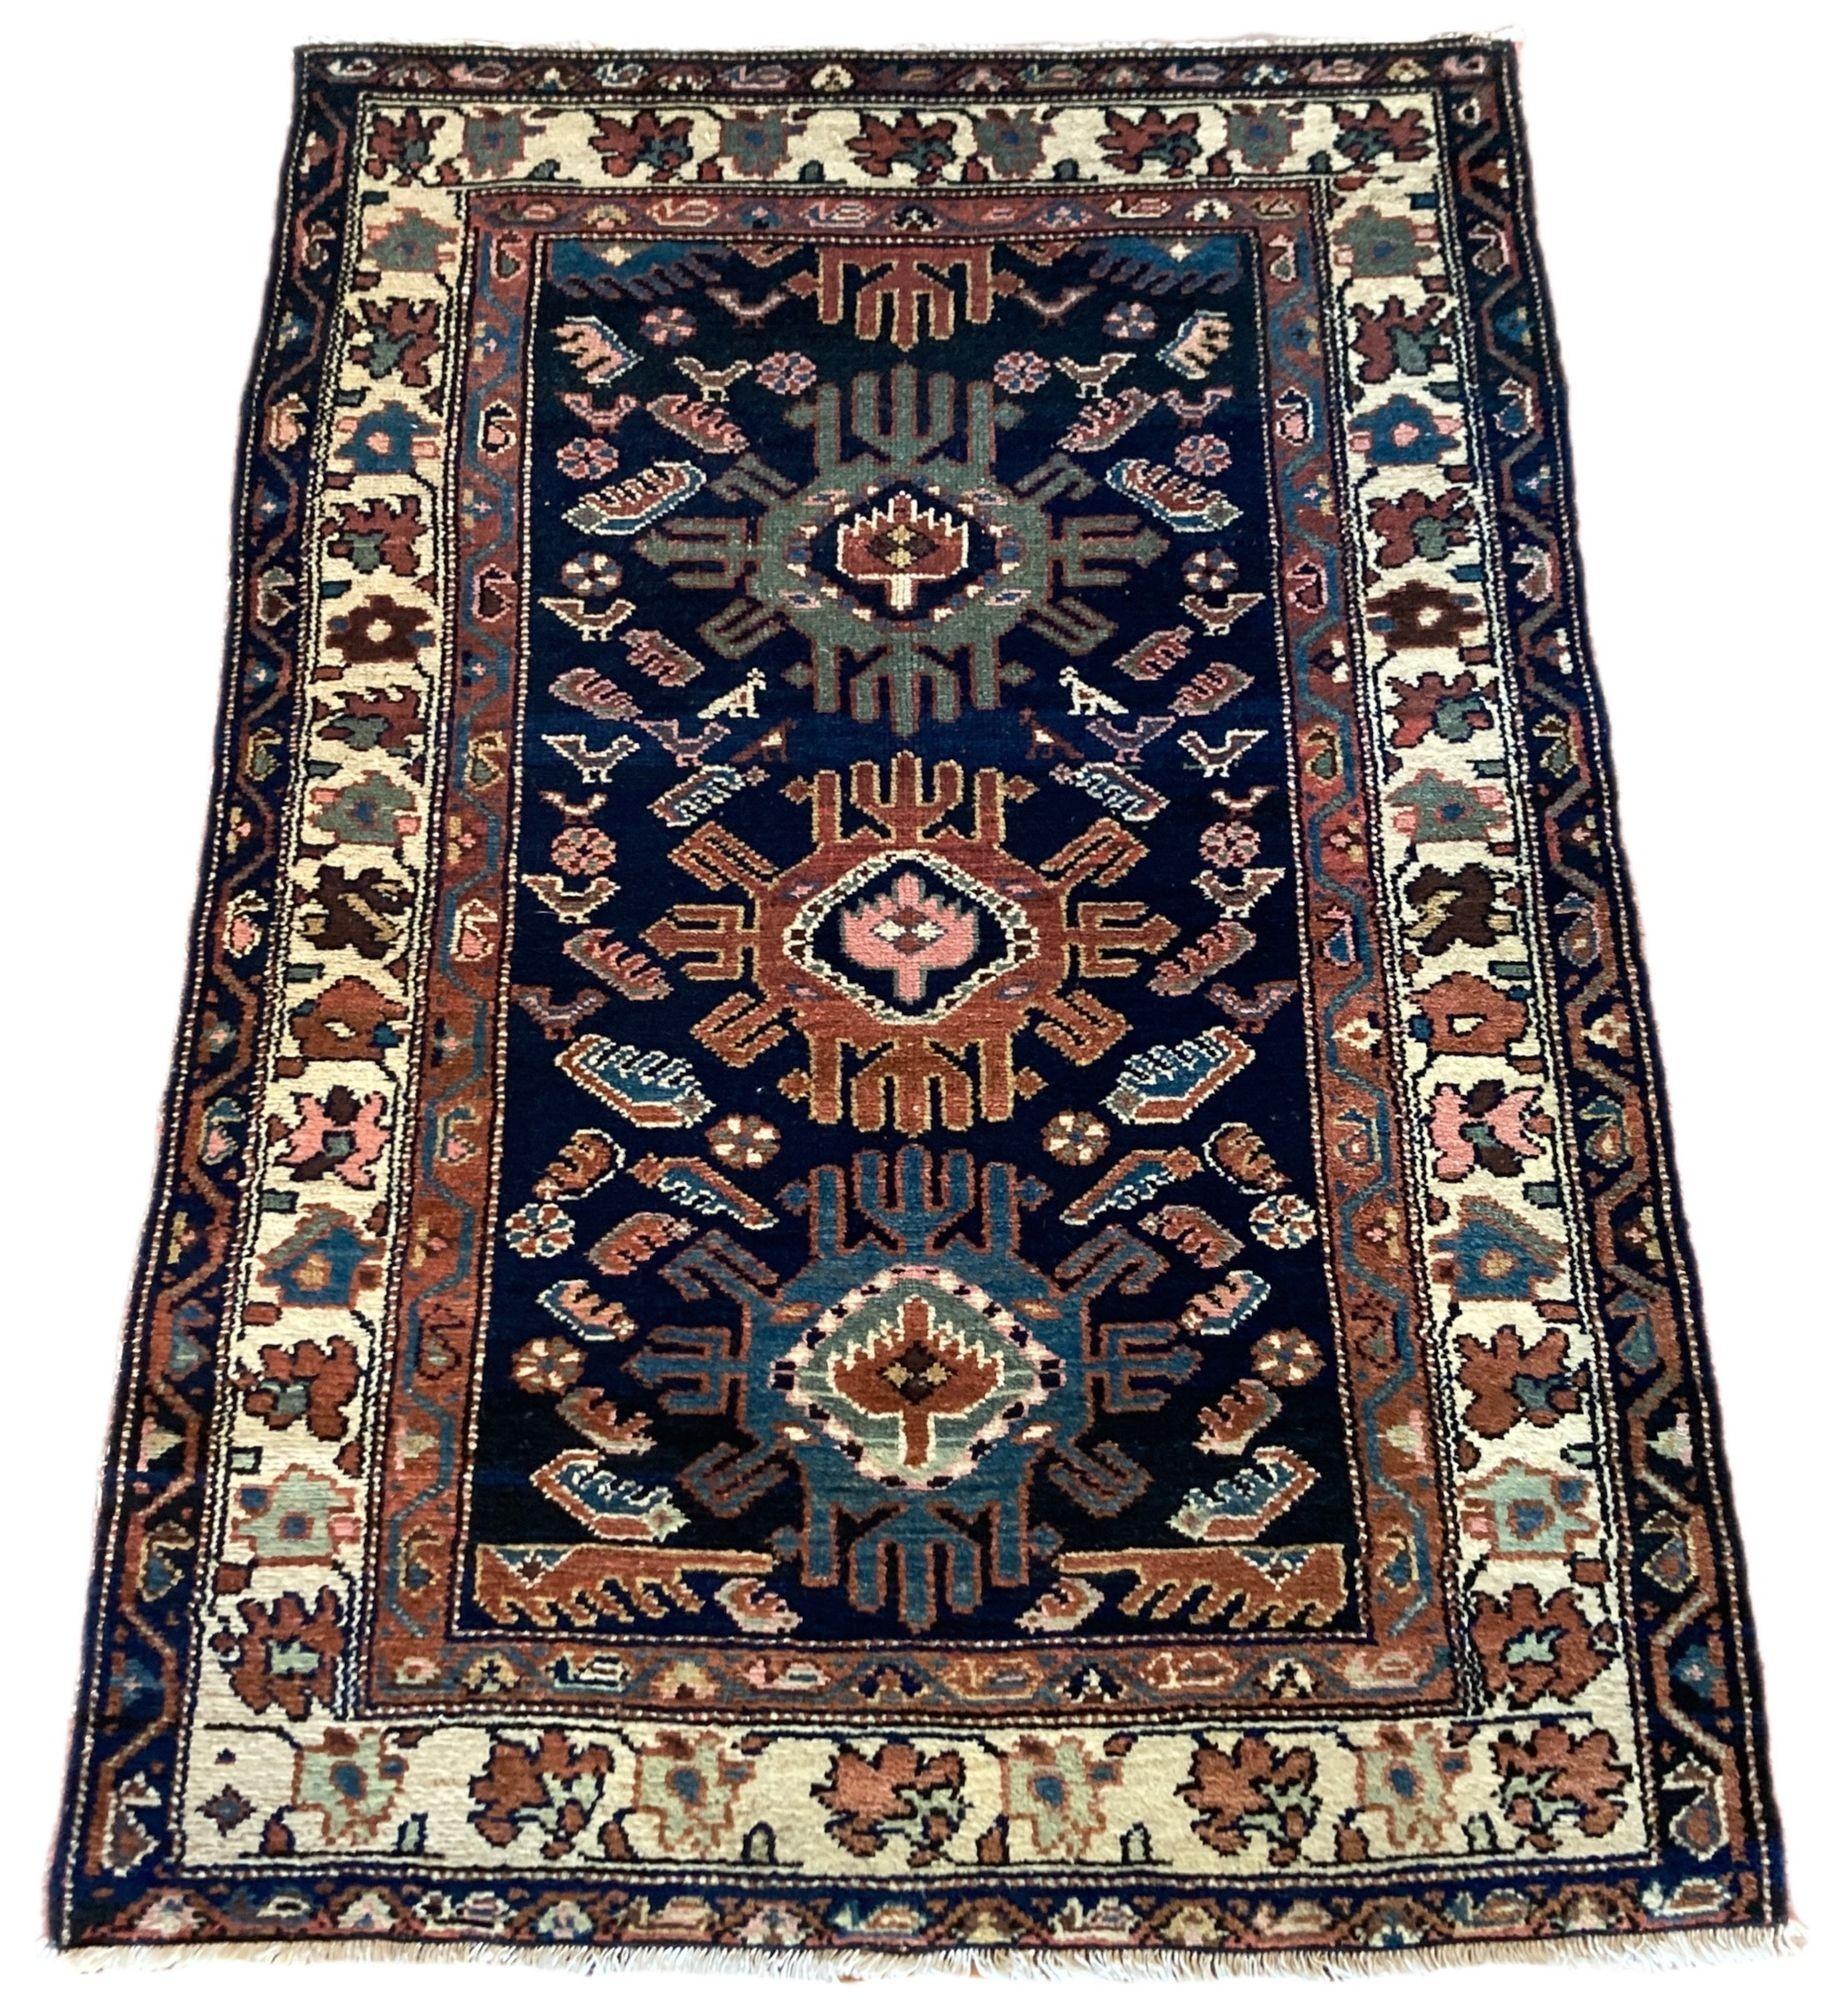 A fab little antique Kurdish rug, handwoven circa 1920 with a slightly random design of stylised symbols and figures on a deep indigo field and ivory border. Lovely secondary colours of greens, blues and golds.
Size: 1.34m x 0.95m (4ft 5in x 3ft